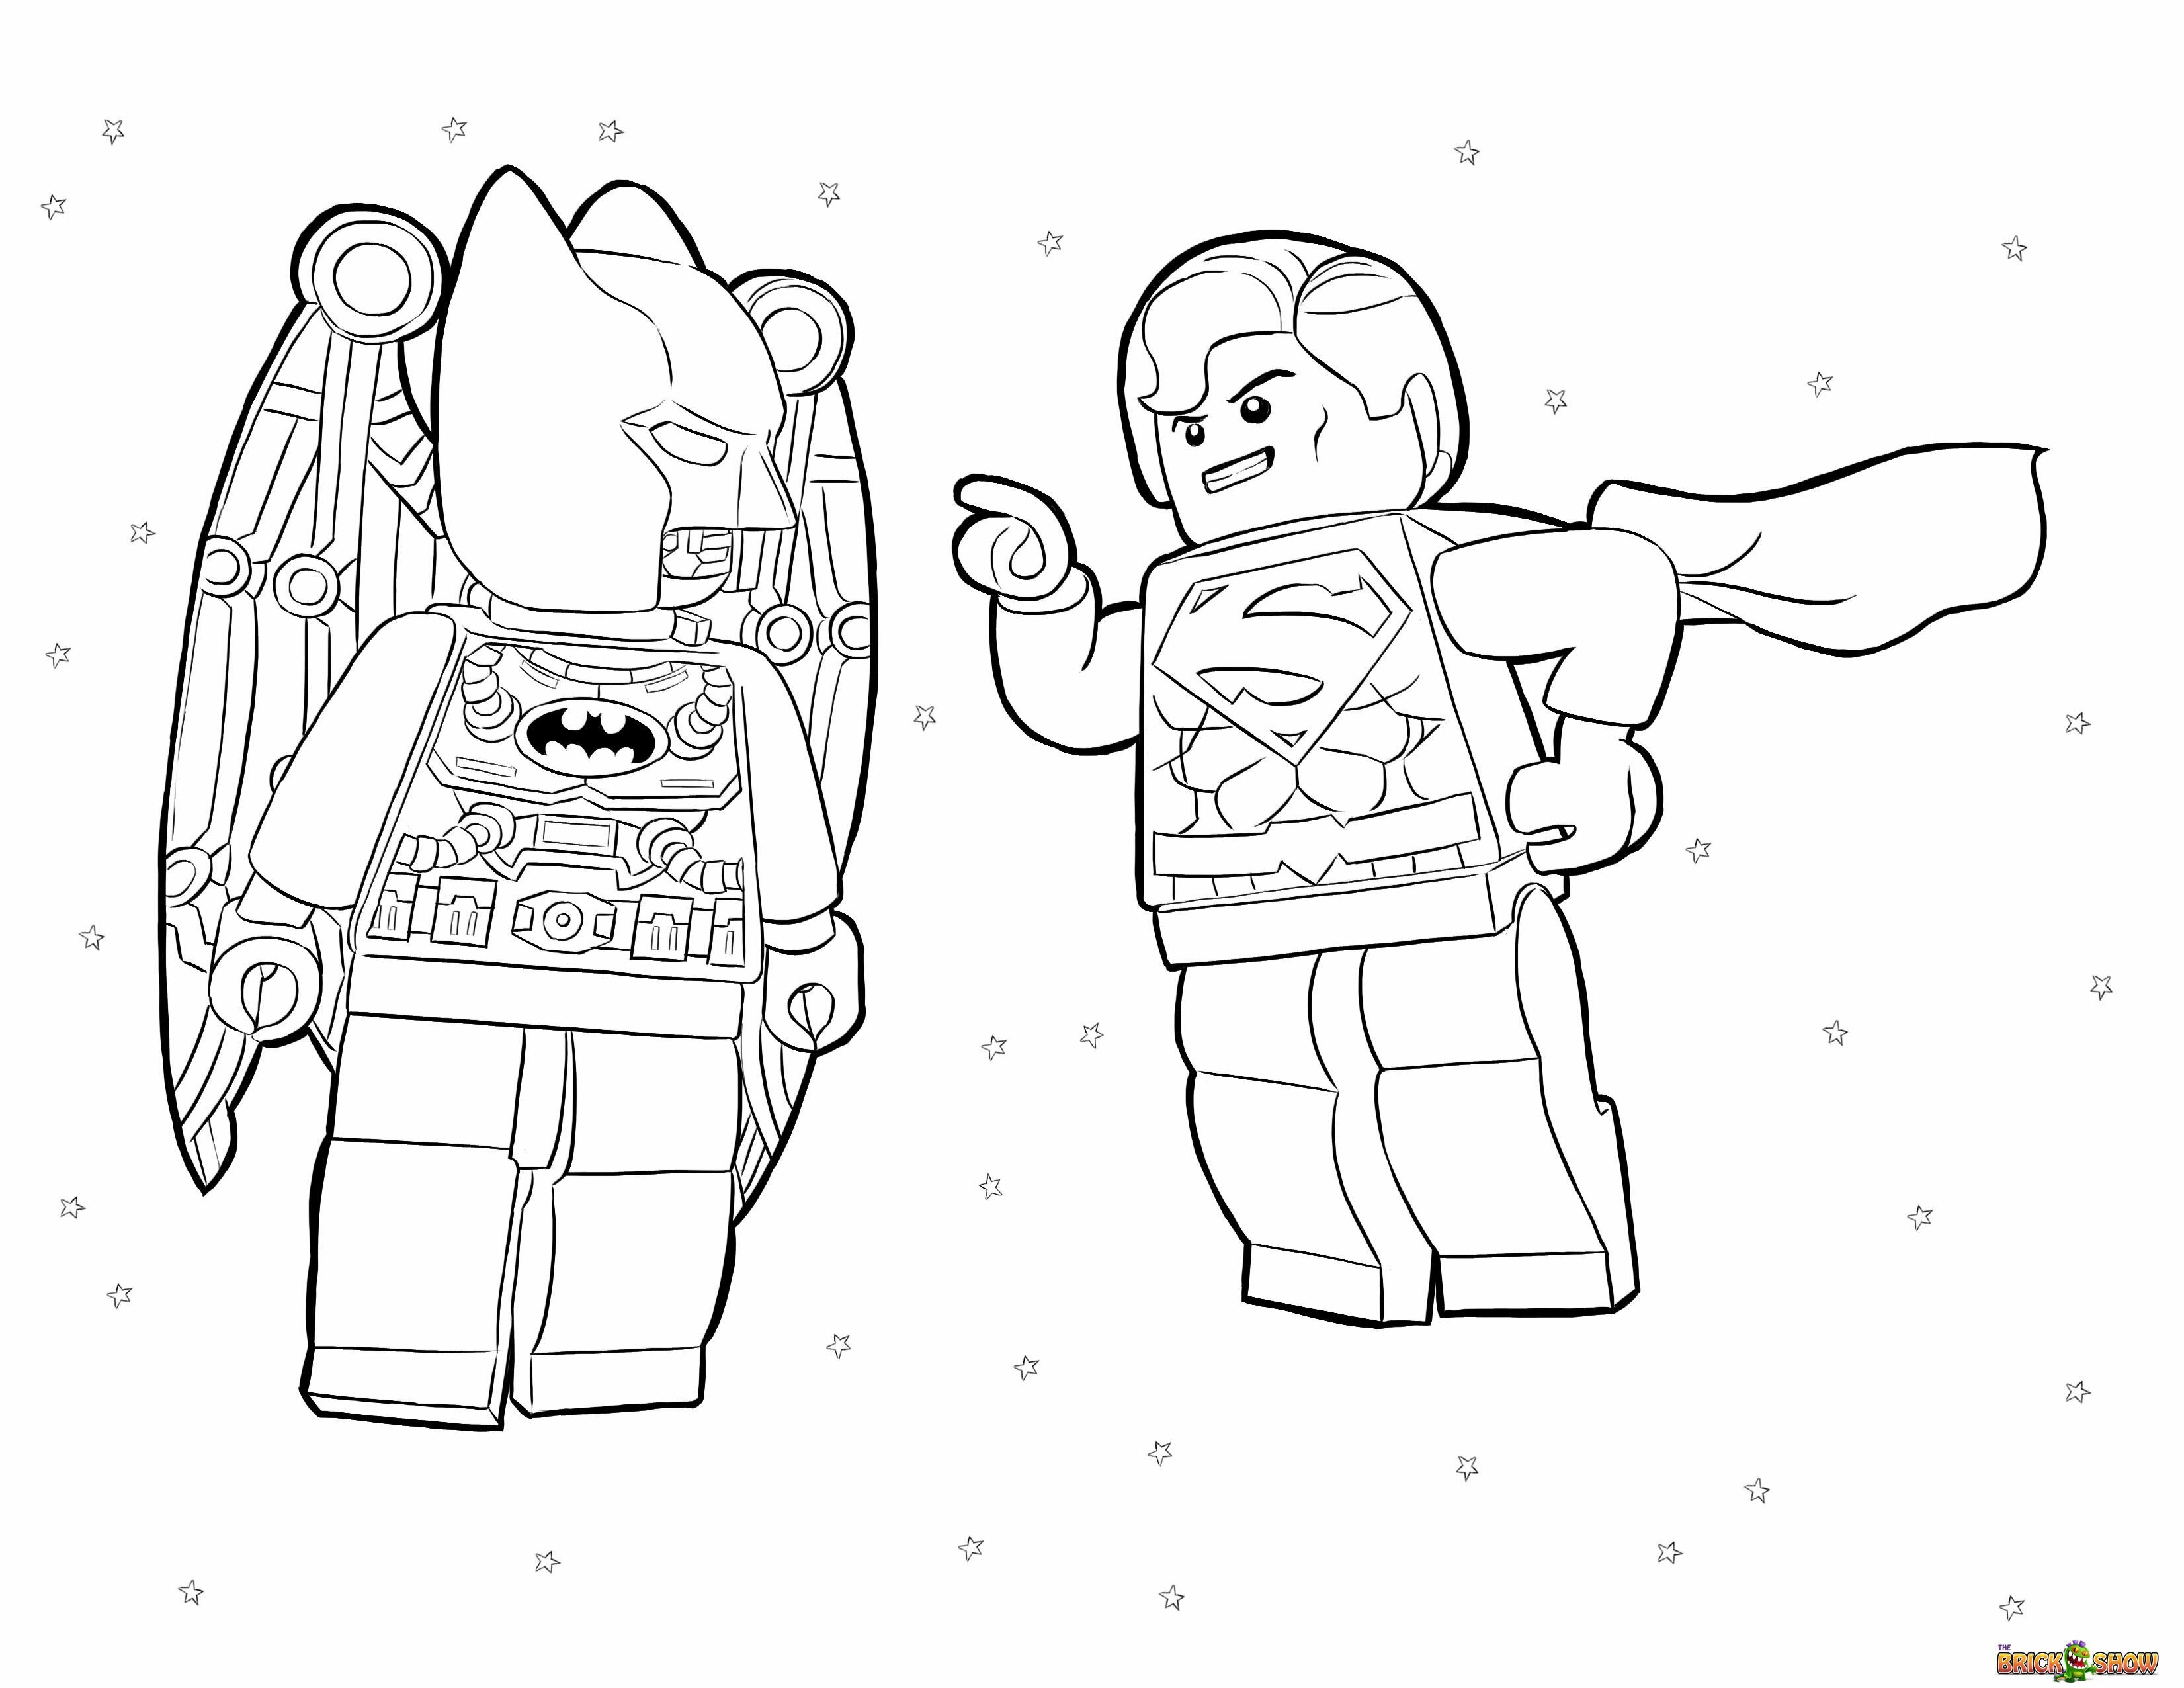 remarkable lego superman and batman in space coloring page printable sheet incredible shape lego batman and robin coloring page 